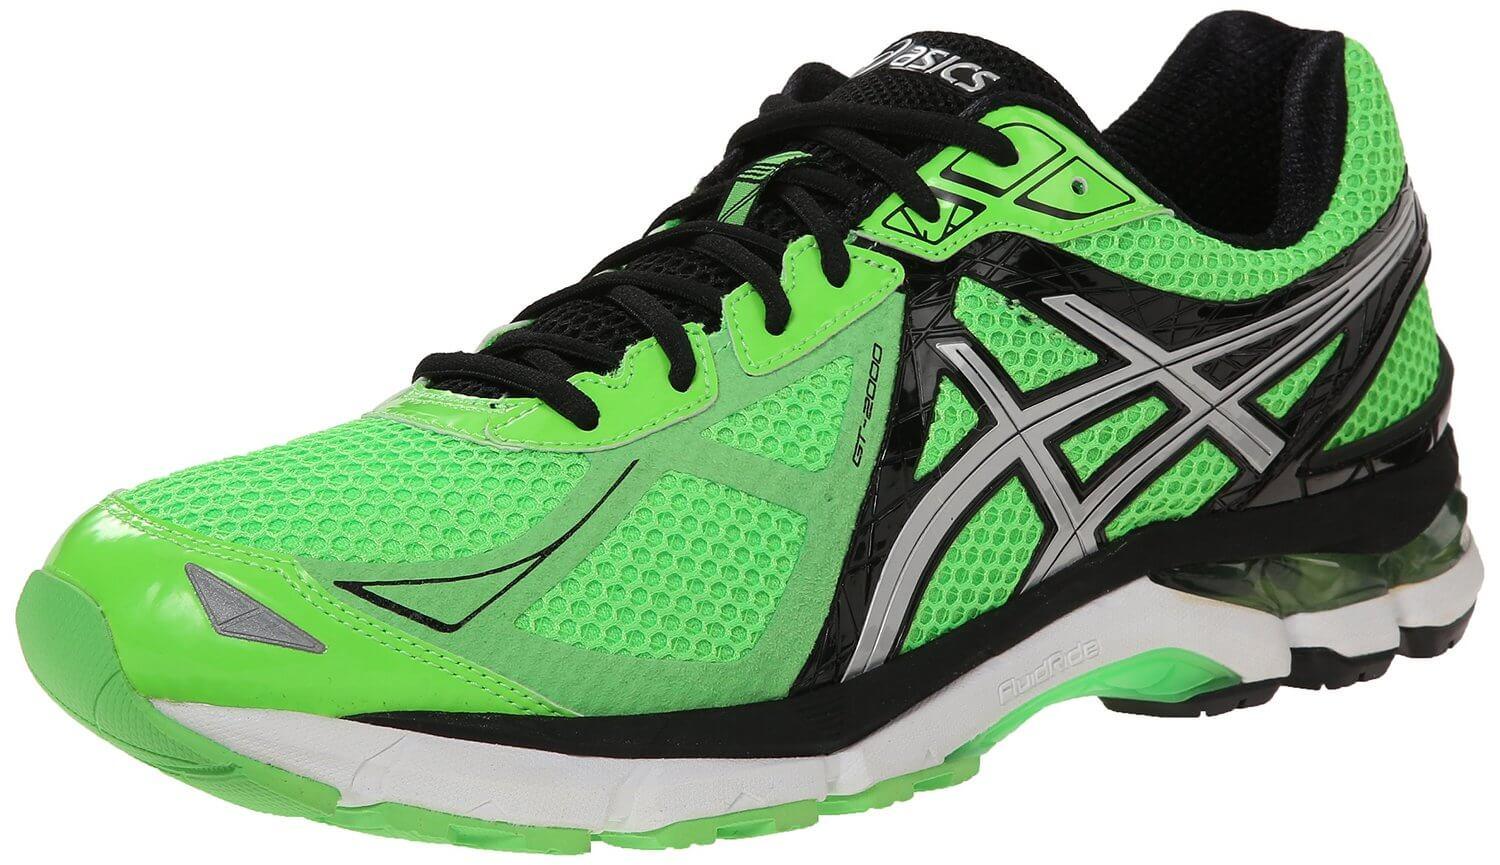 Asics GT 2000 3 Review - To buy or not 